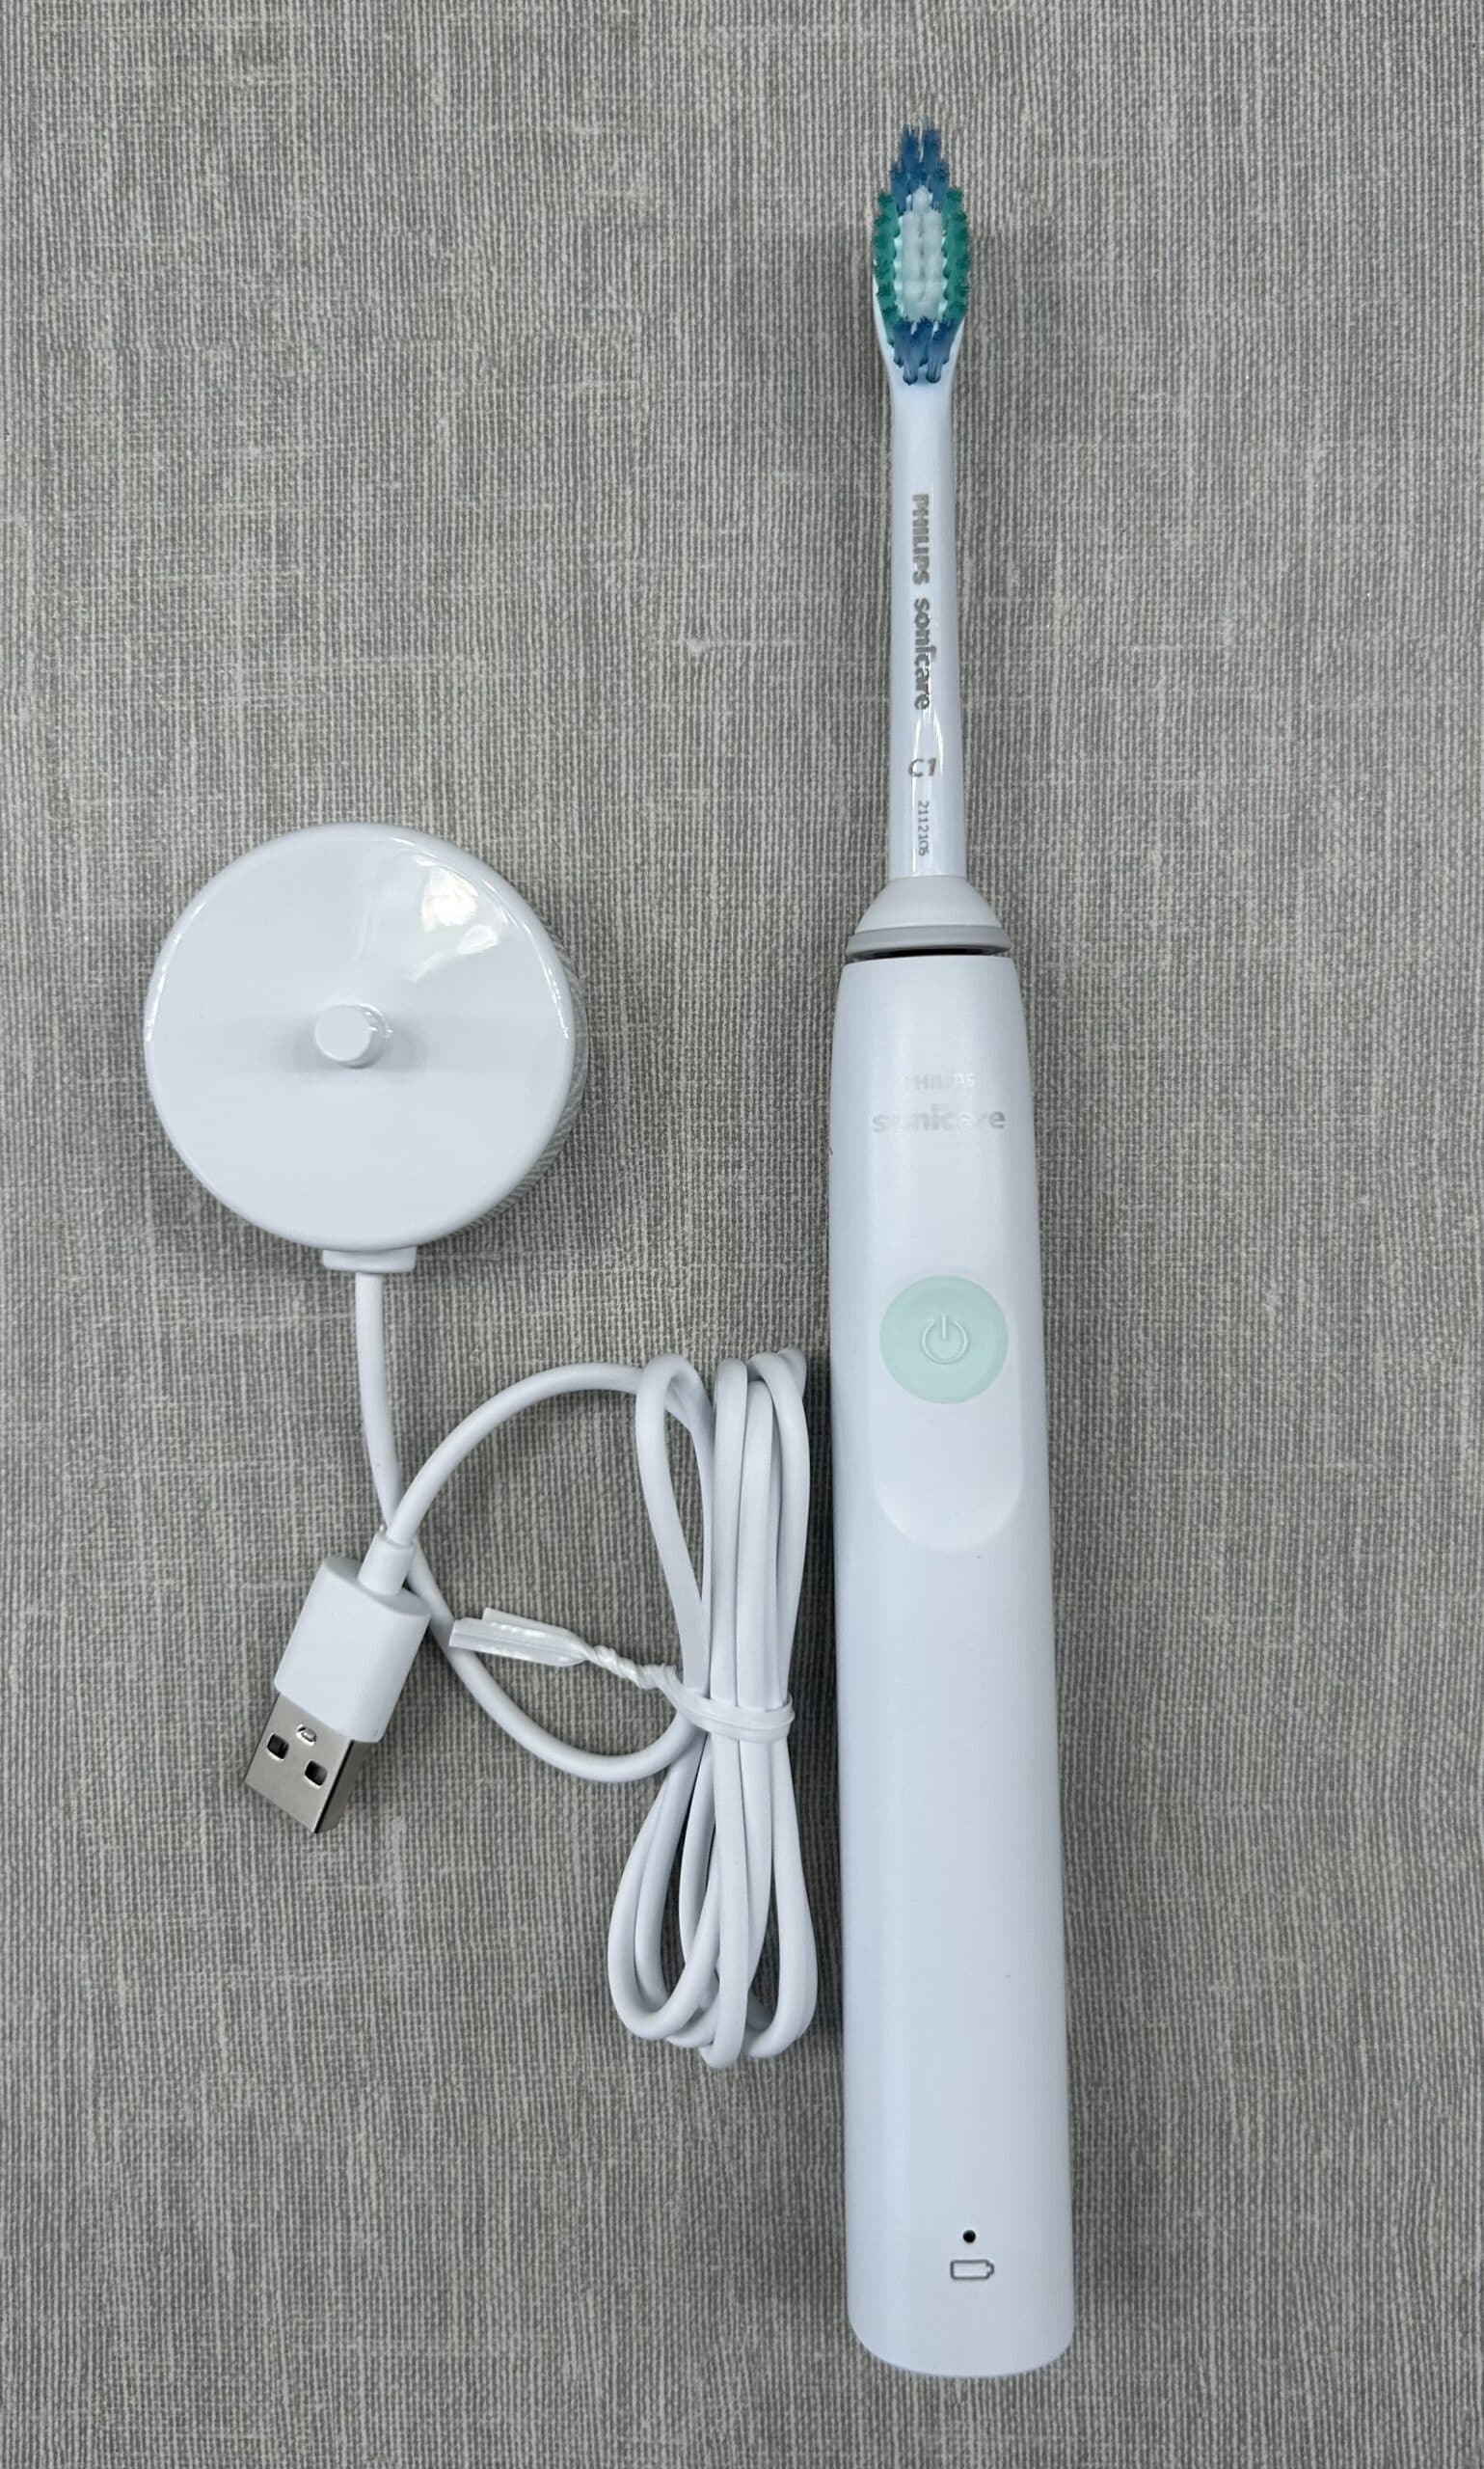 Philips Sonicare 2100 Electric Toothbrush | My Dental Advocate